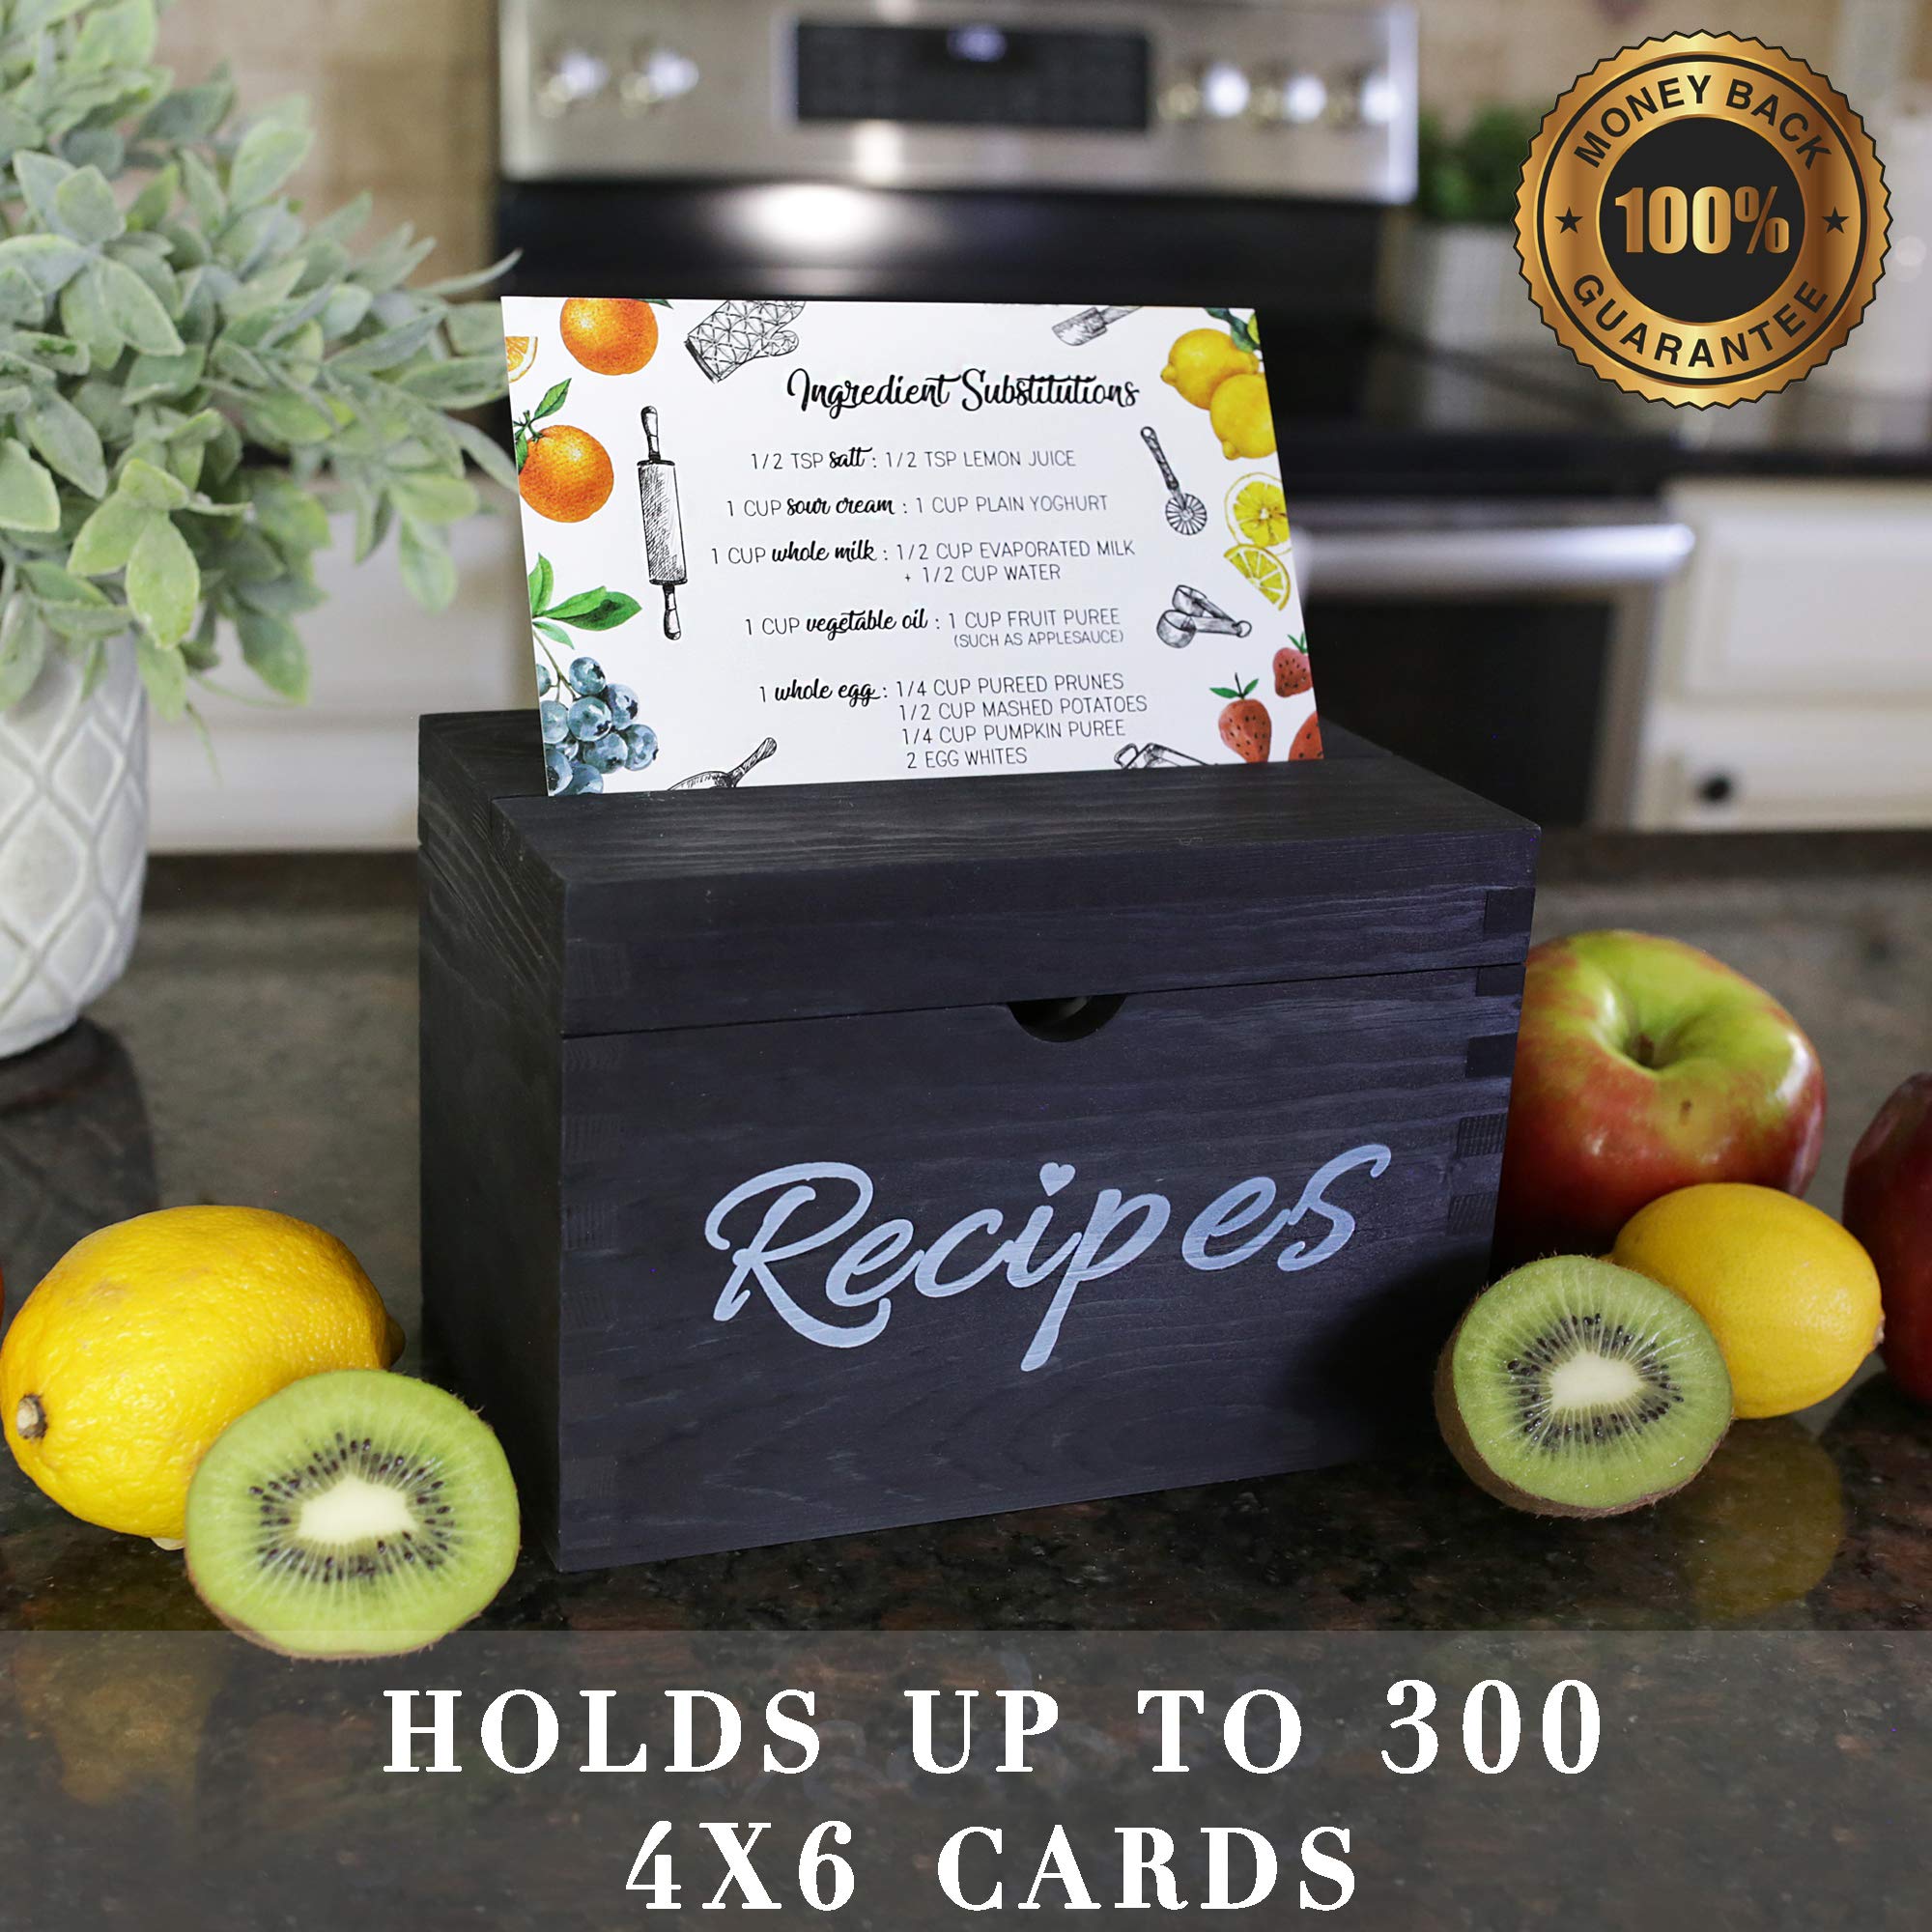 Baking & Beyond Recipe Box, Recipe Card Holder Box with 100 4x6 inch Recipe Cards, 9 Dividers, 1 Conversion & 1 Substitution Card, Vintage Style Solid Pinewood Recipe Organizer (7x5.3x4, Black)